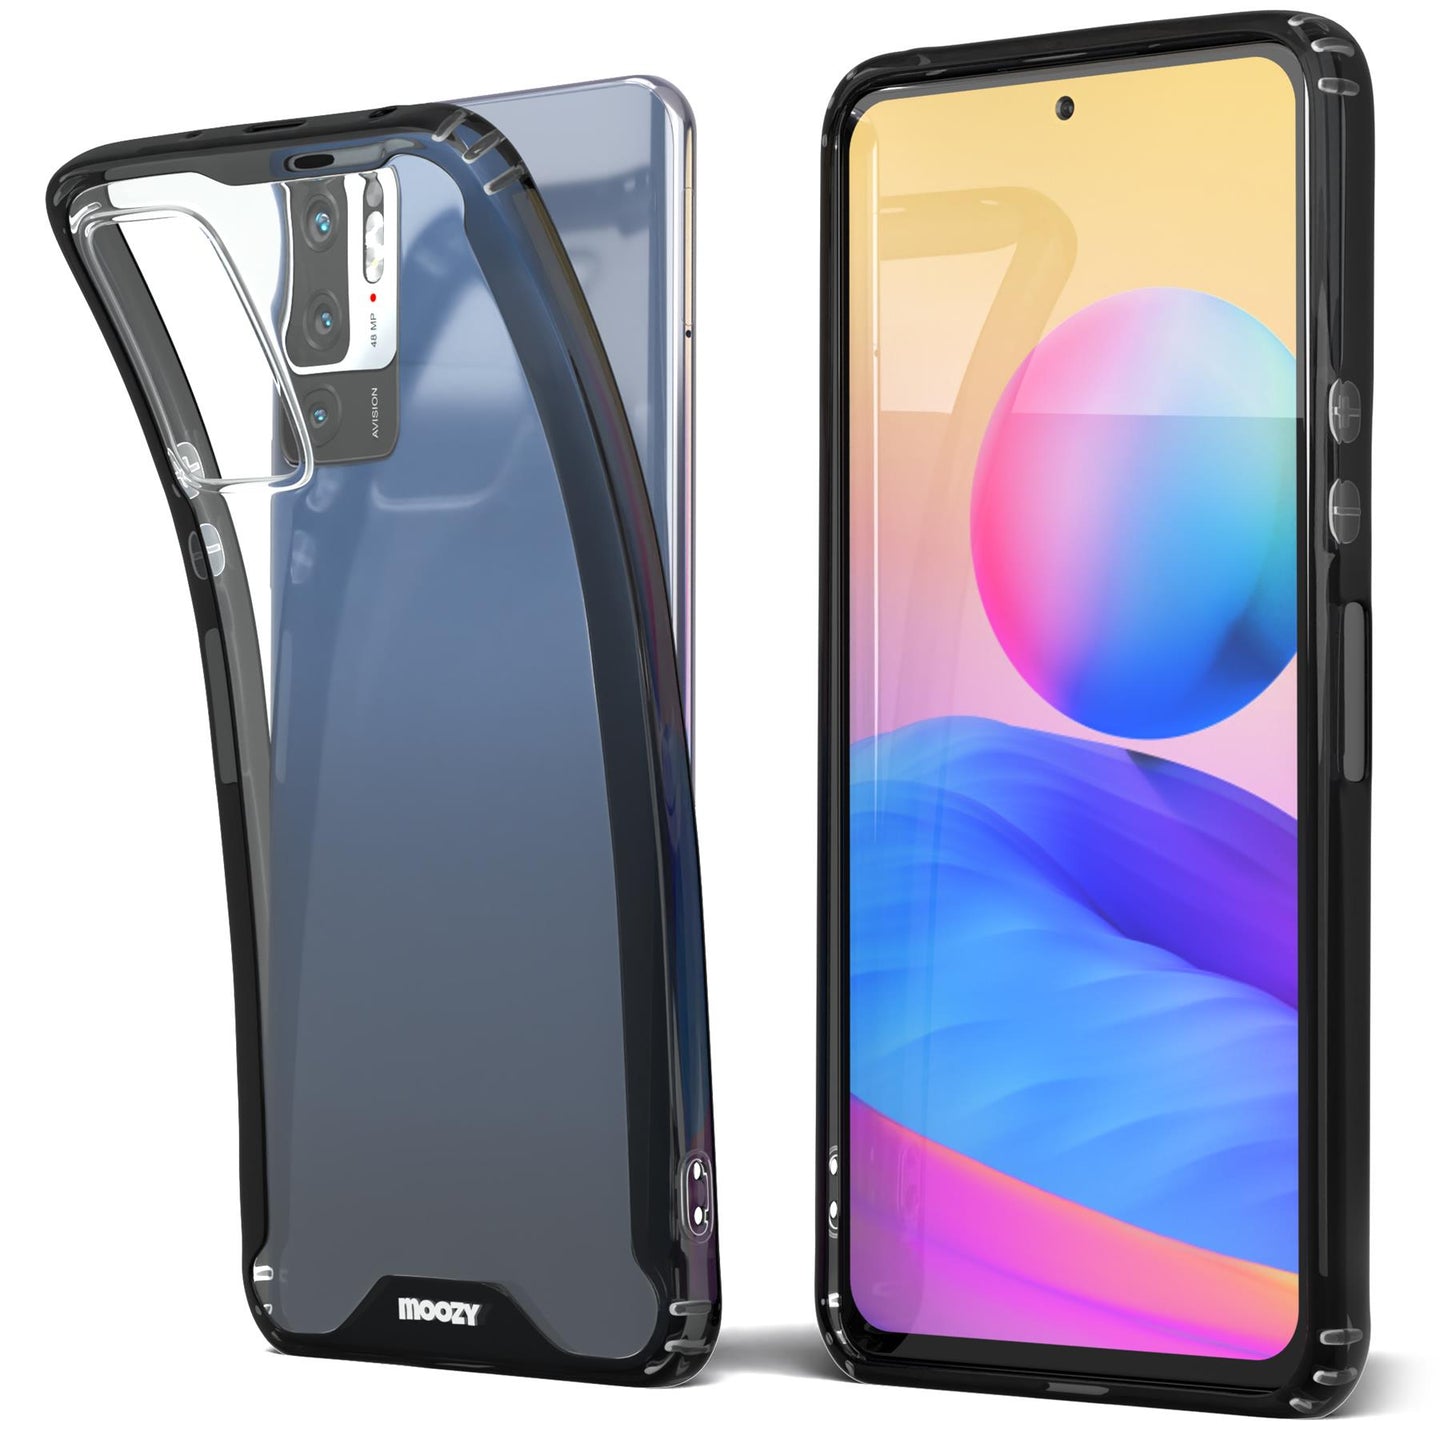 Moozy Xframe Shockproof Case for Xiaomi Redmi Note 10 5G and Poco M3 Pro 5G - Black Rim Transparent Case, Double Colour Clear Hybrid Cover with Shock Absorbing TPU Rim